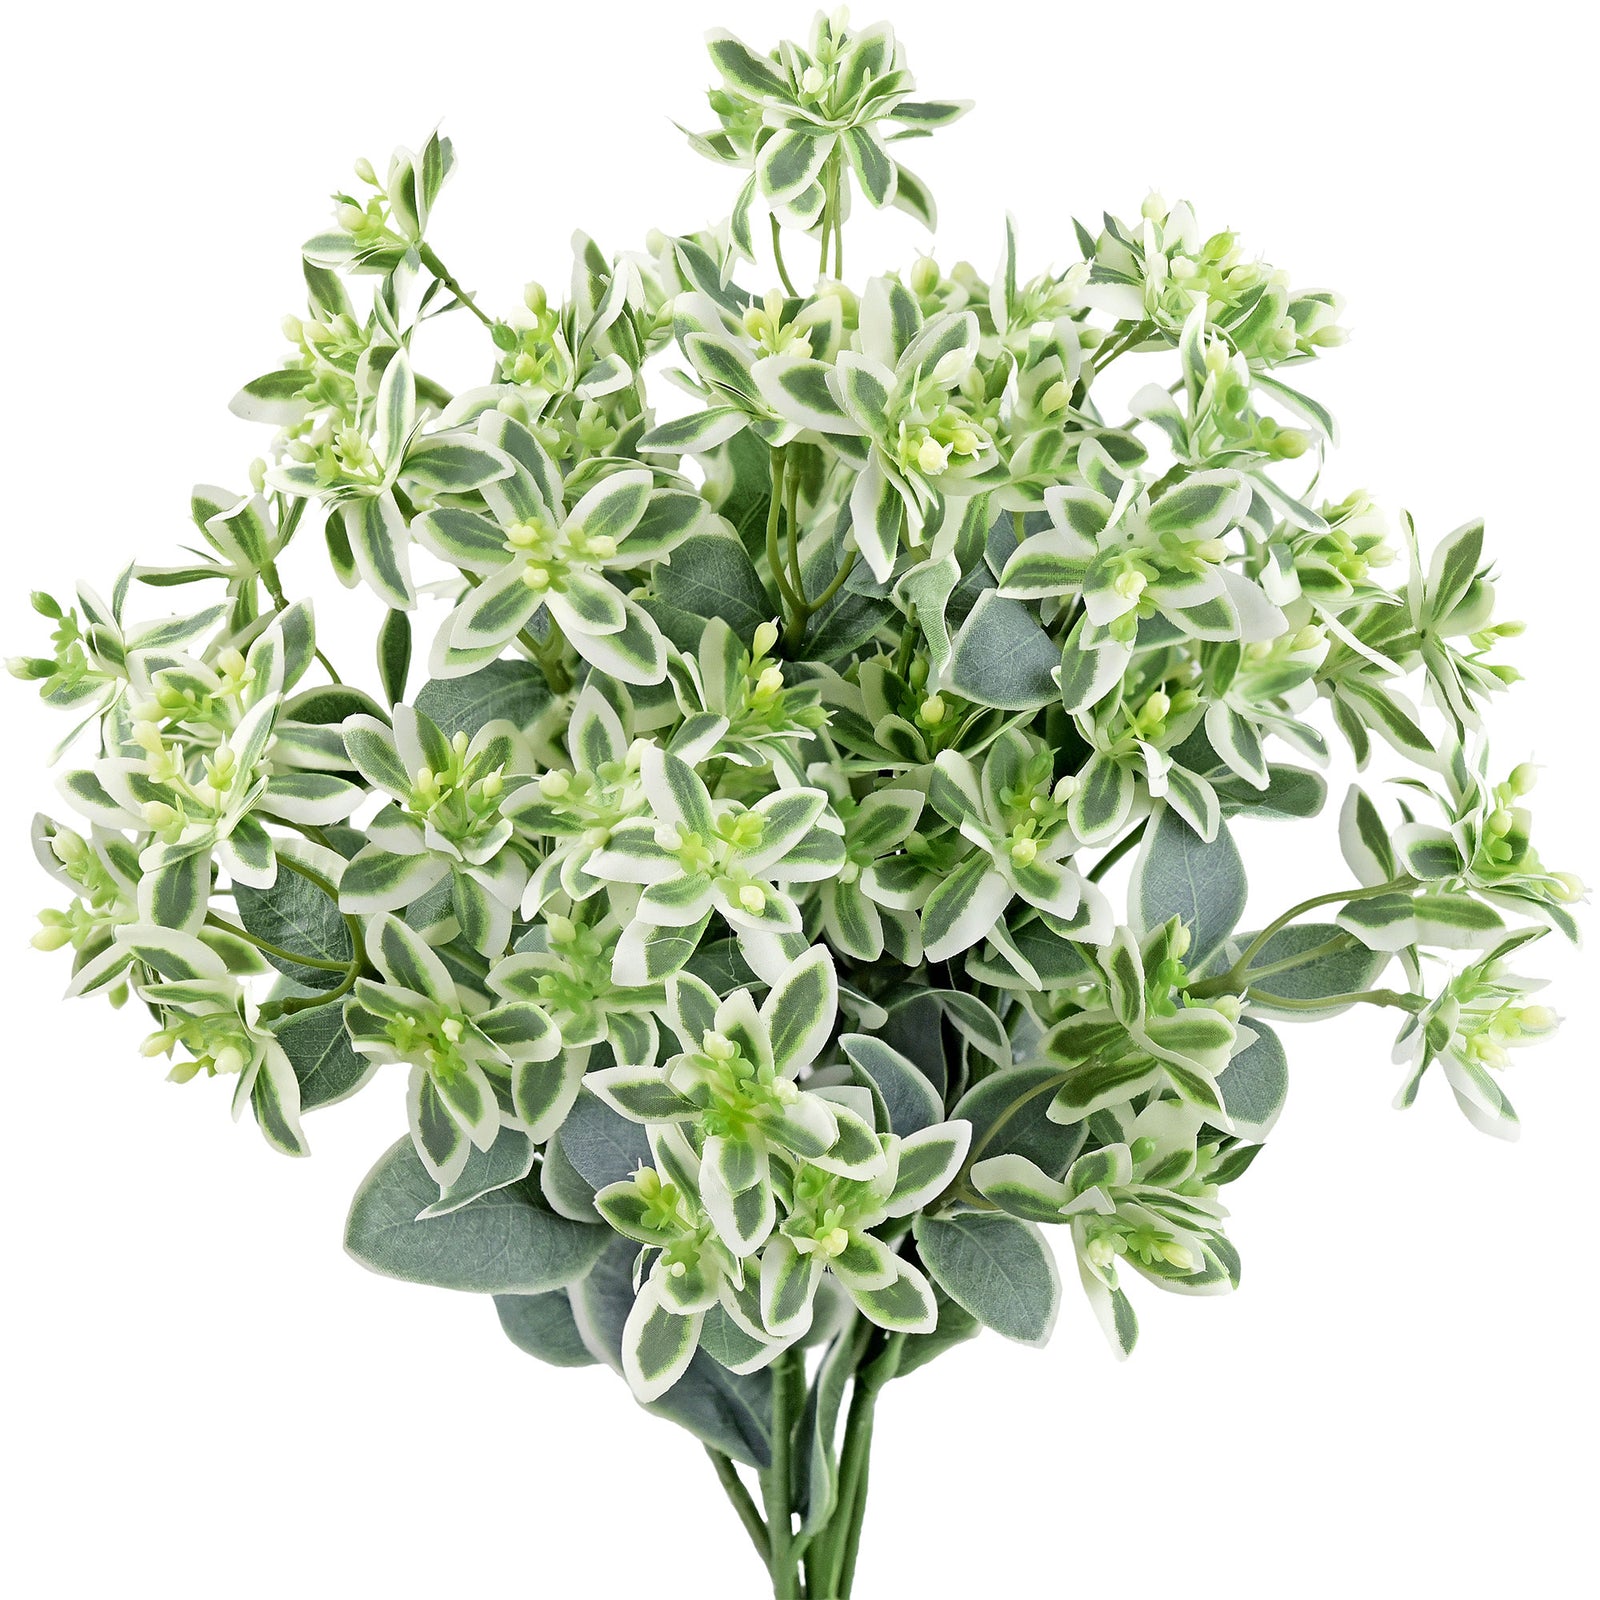 FiveSeasonStuff Snow on the Mountain Euphorbia Marginata Artificial Leaves and Branches Filler Greenery 18 inches 6 Stems